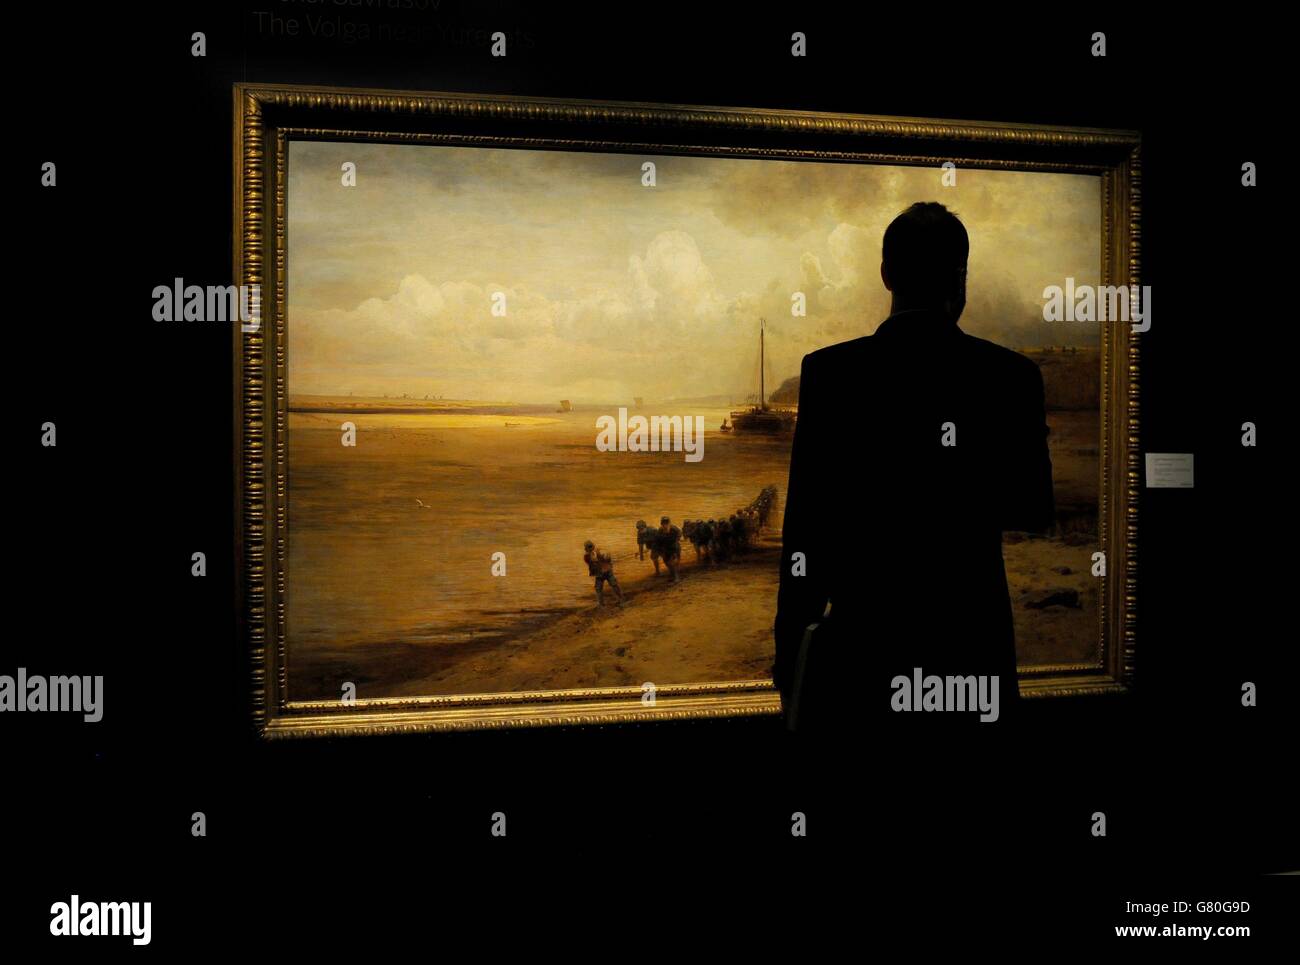 The Shadow Film Wall Art for Sale